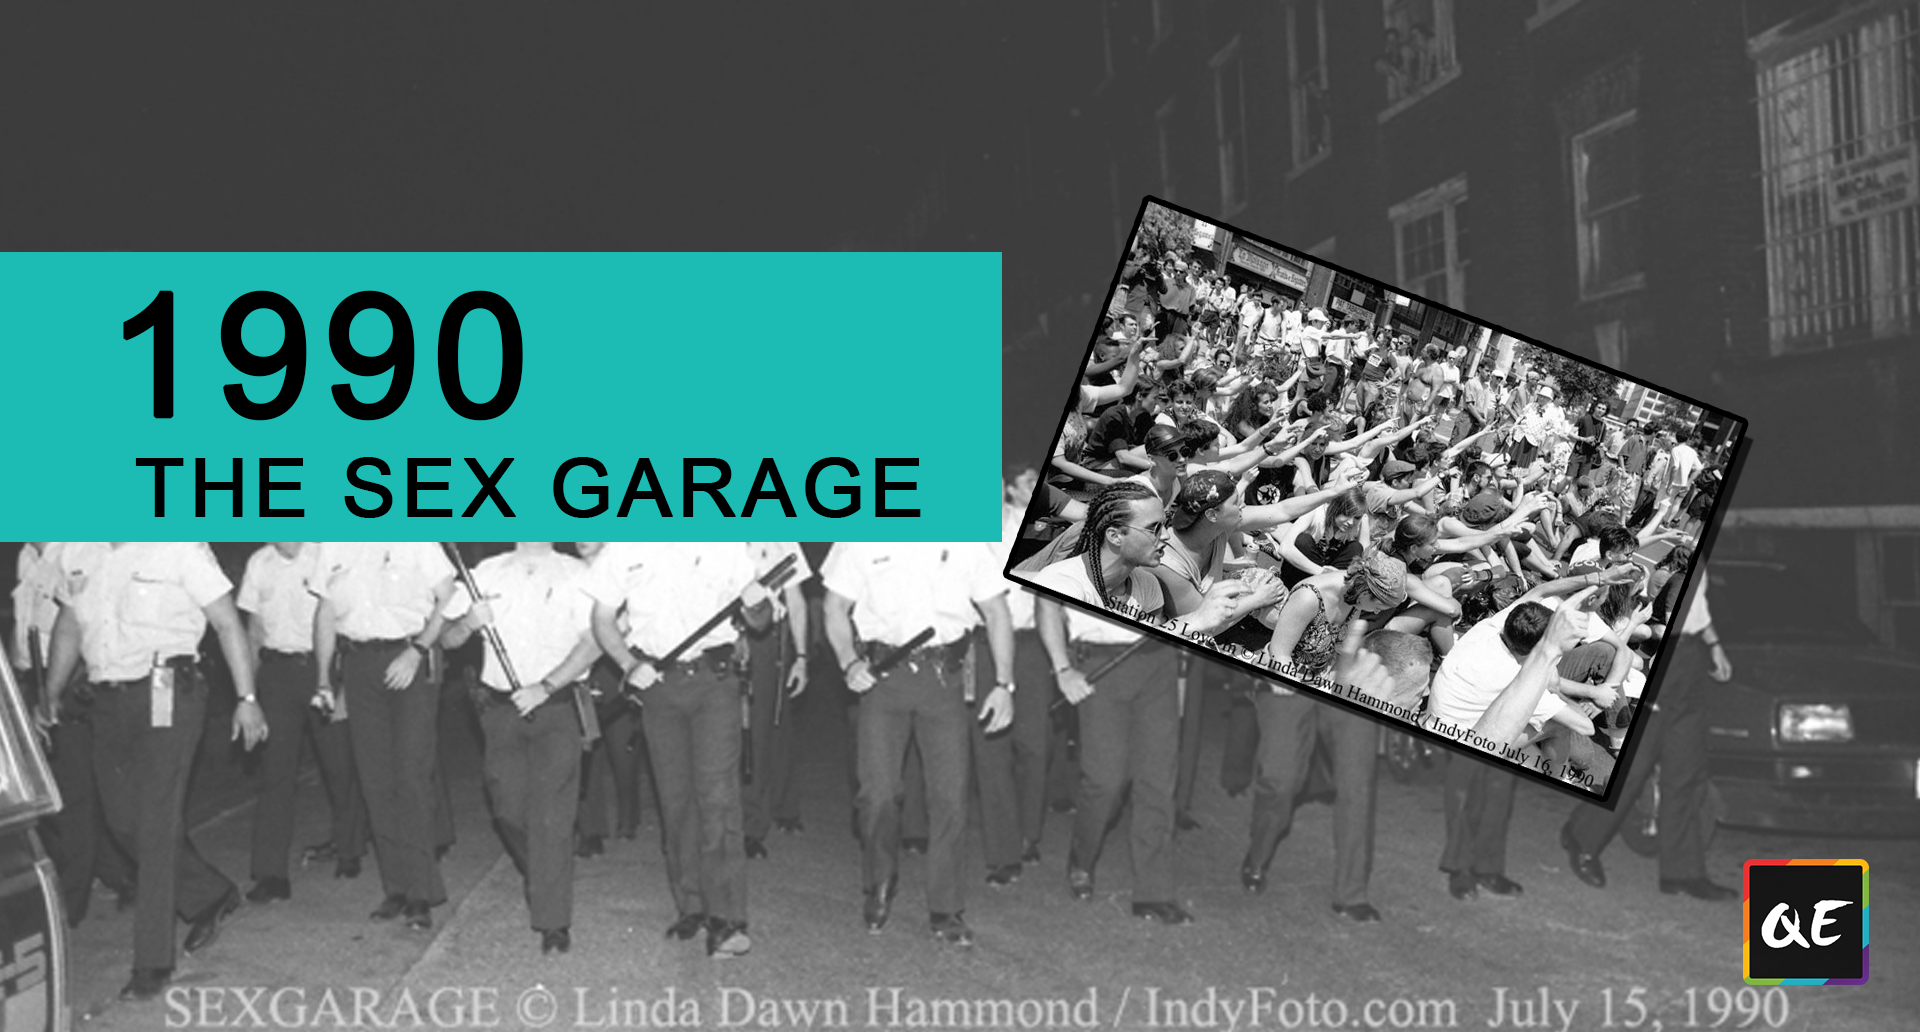 QueerEvents.ca - History - Protests in Canadian LGBT2Q+ History: Montreal Sex Garage Raids 1990